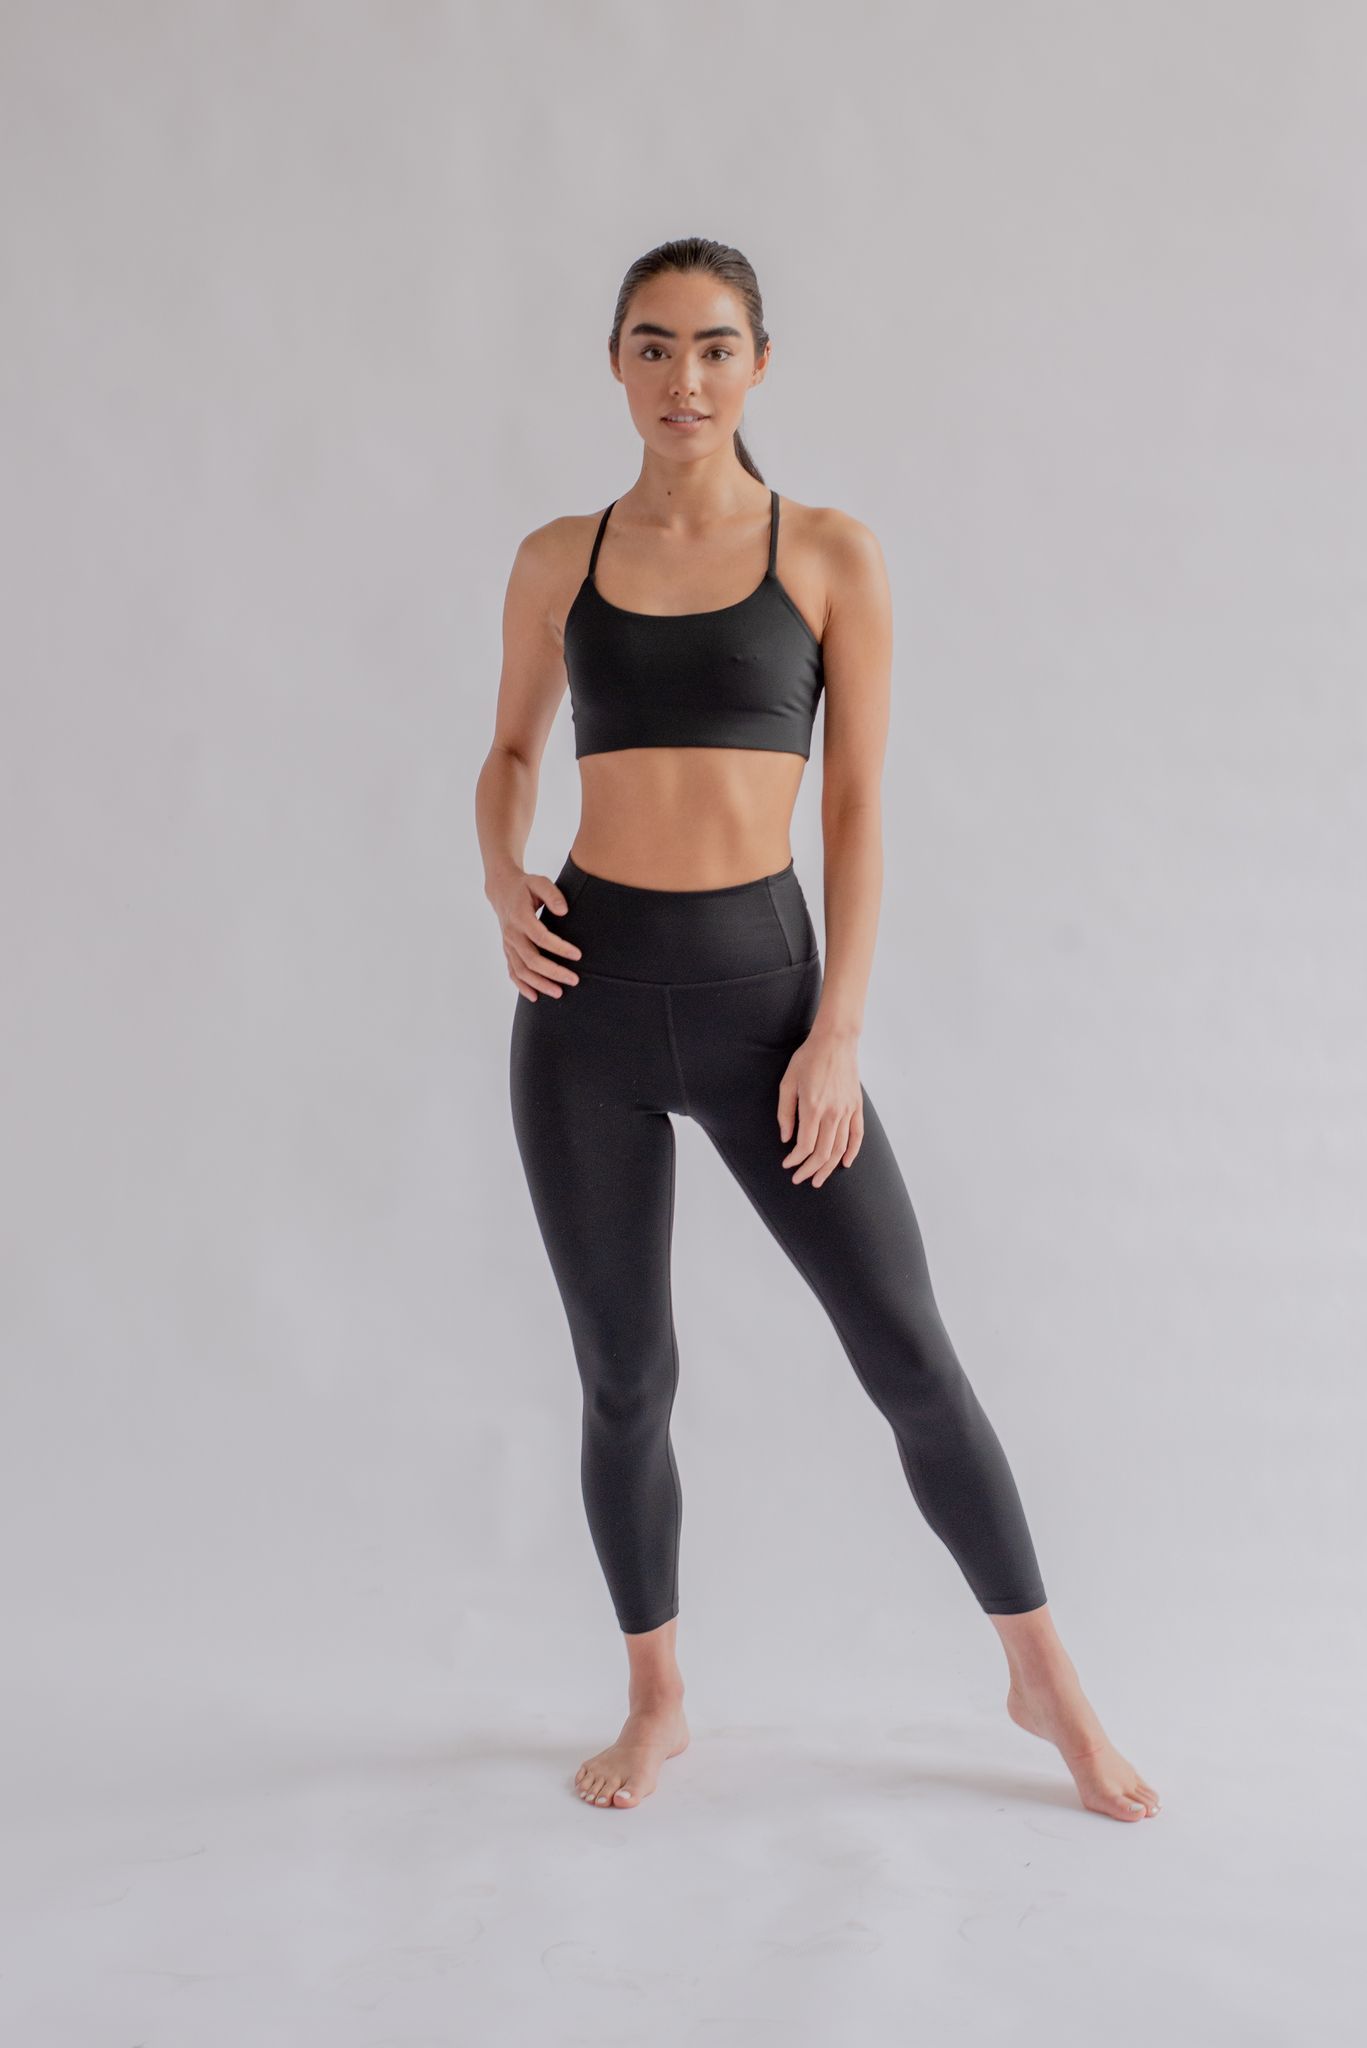 Black Andy Sport Bra by Girlfriend Collective on Sale